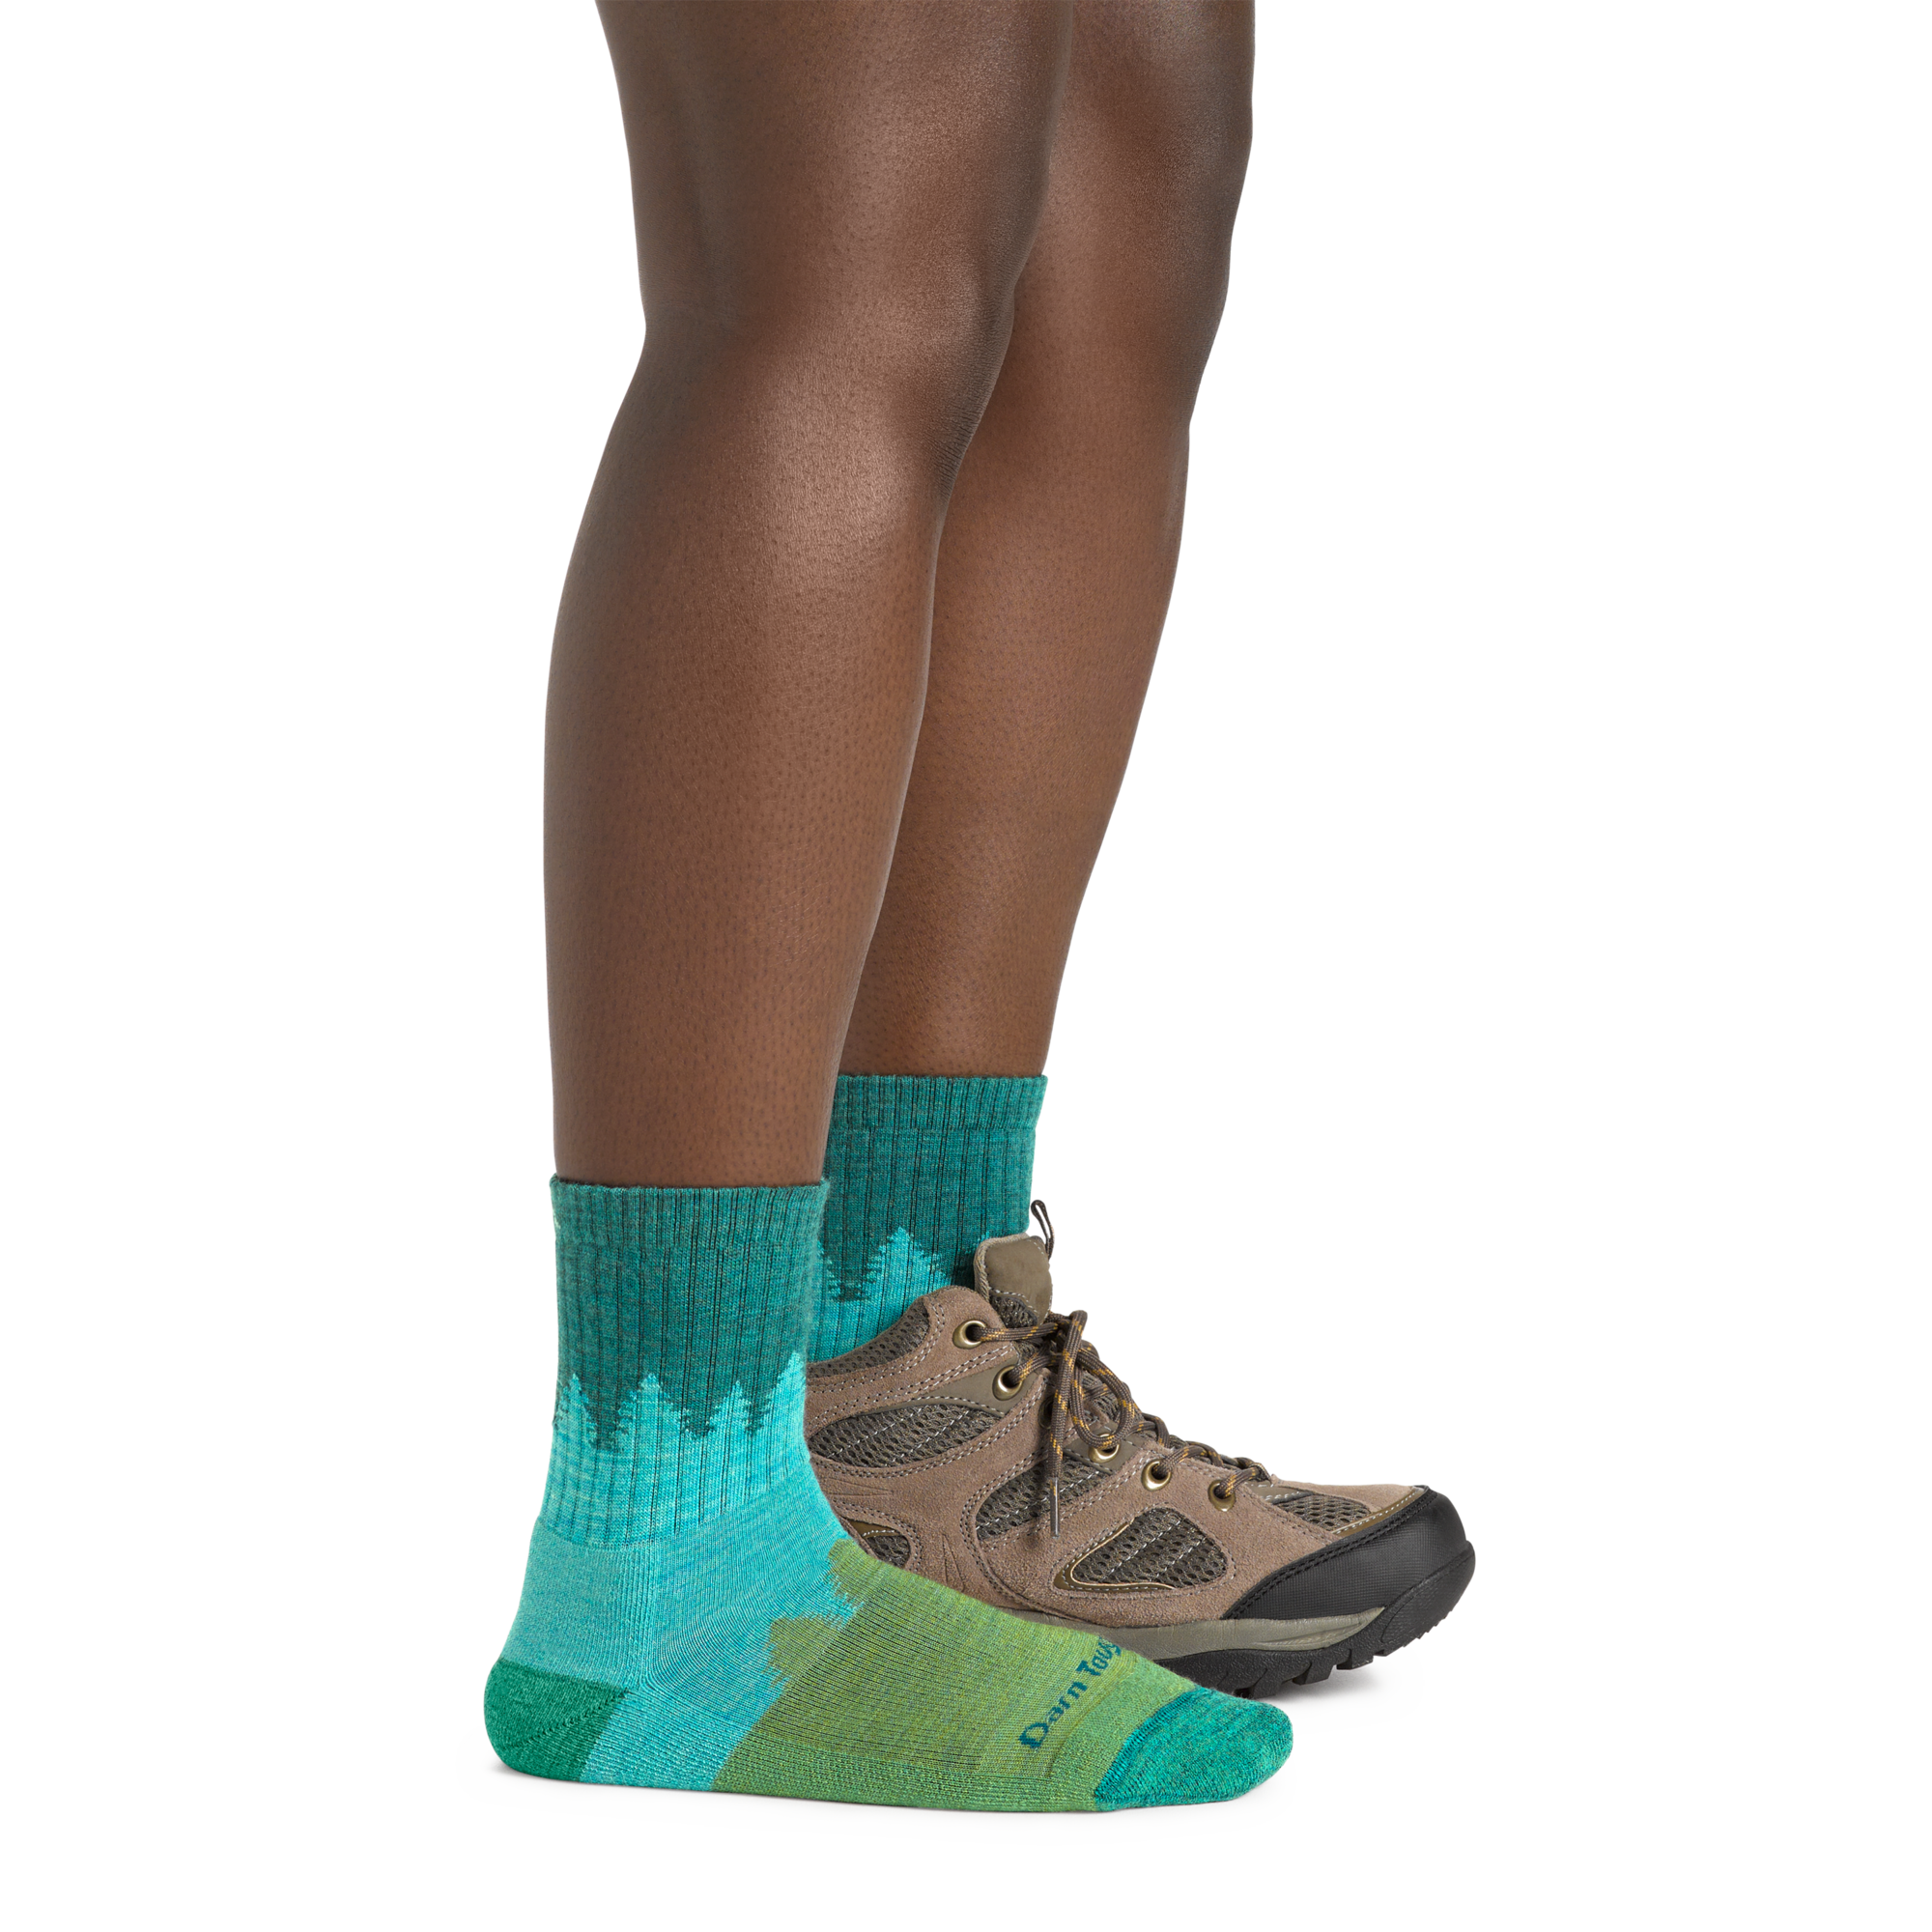 Profile image of a woman's legs on a white background wearing Women's Treeline Micro Crew Midweight Hiking Socks in Aqua with one foot in a hiking boot